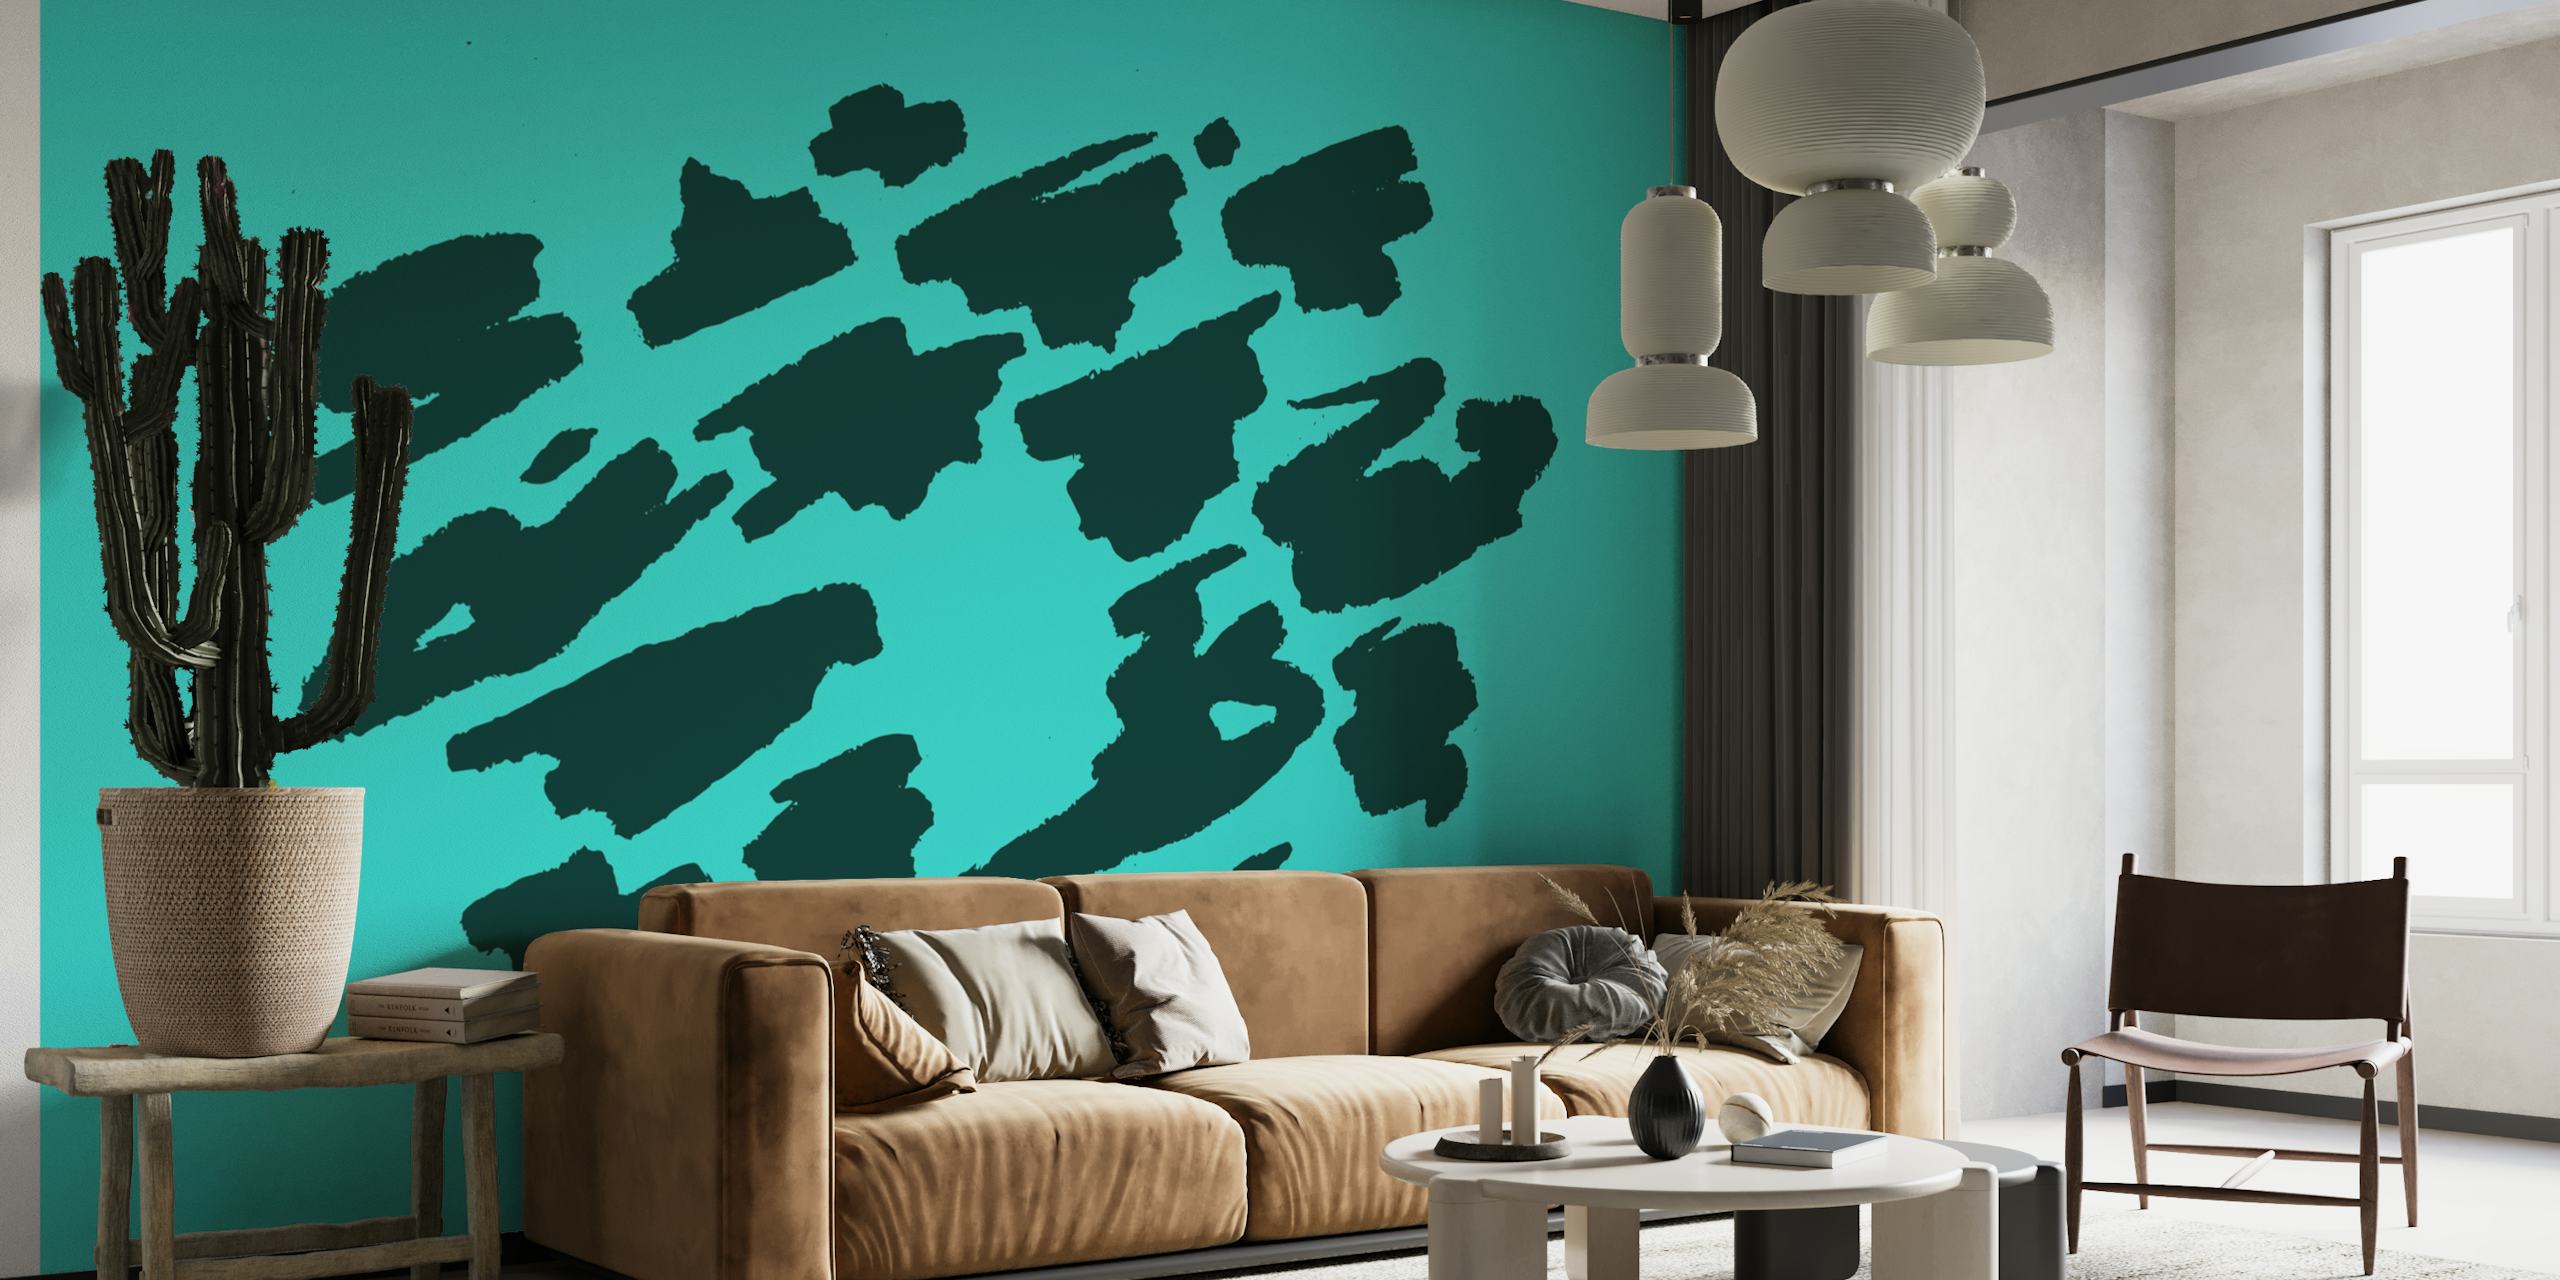 Bright Turquoise Modernist behang